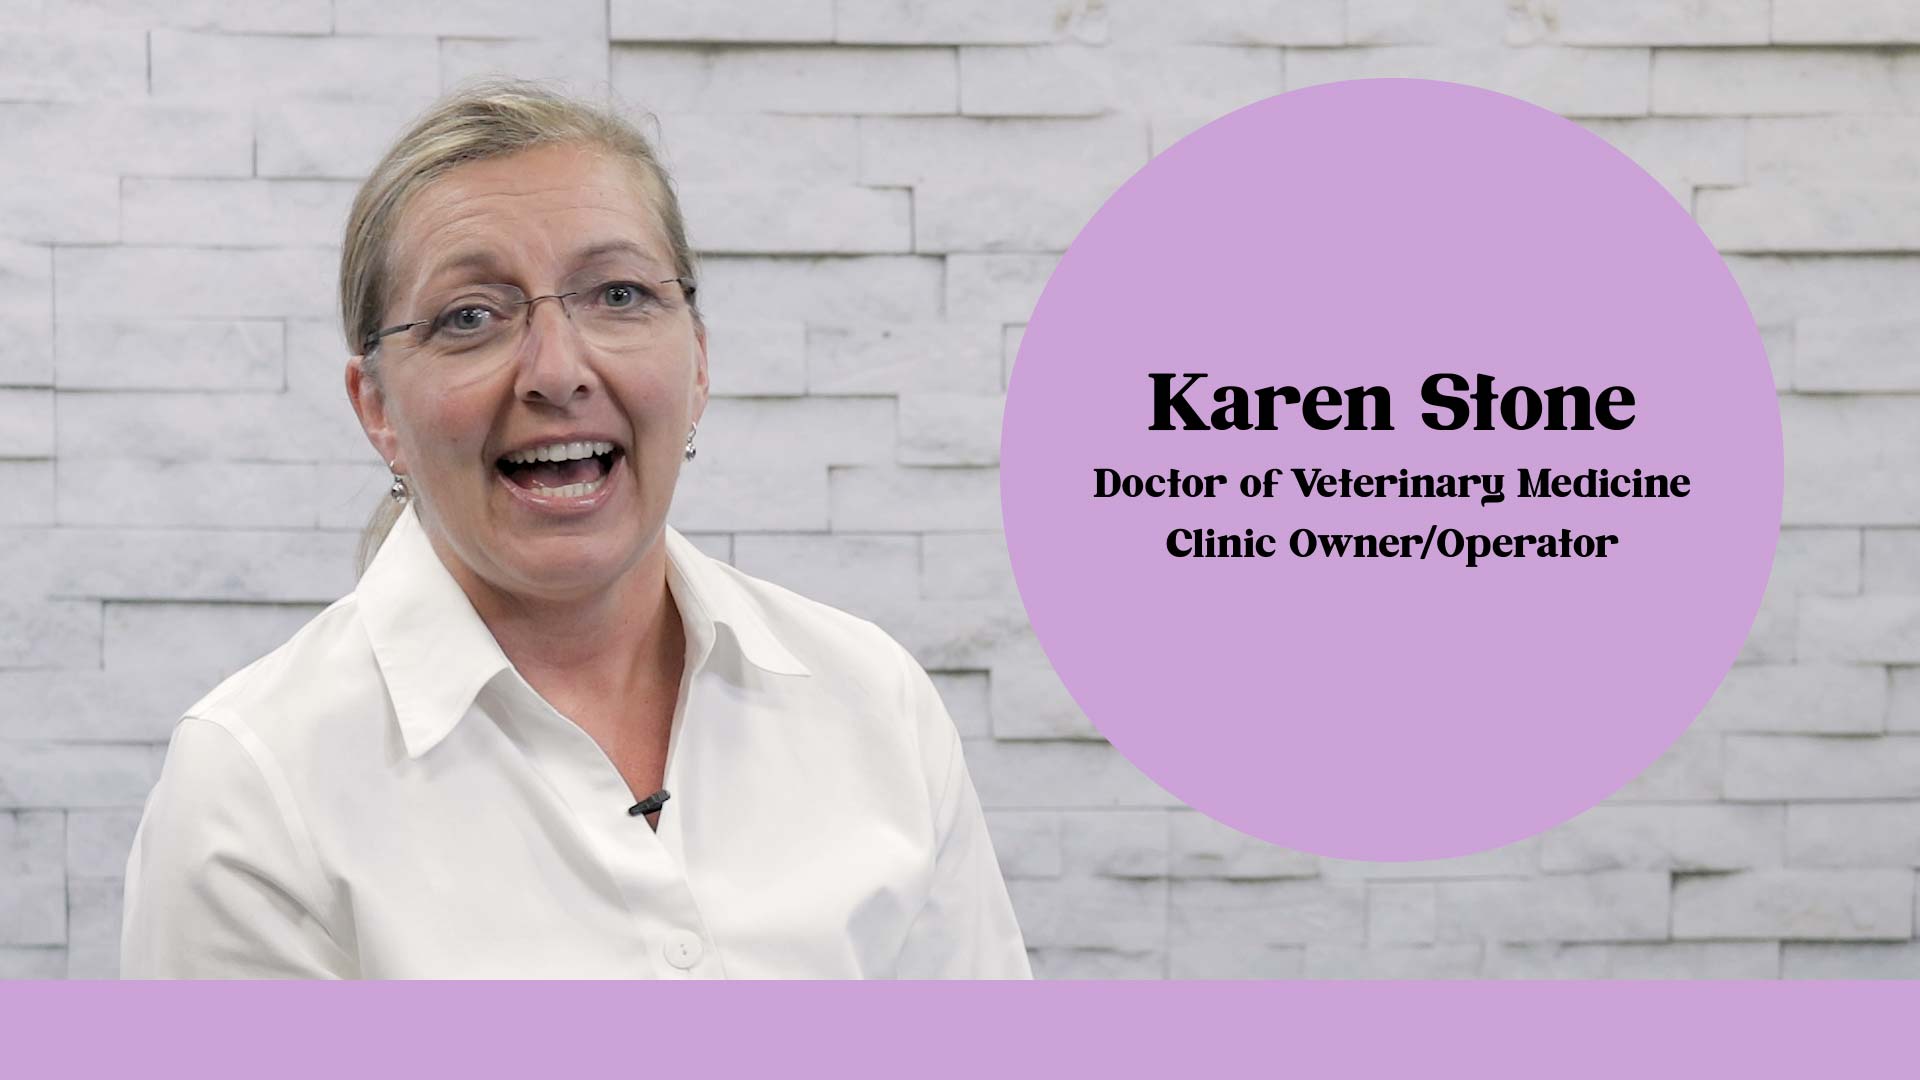 Load video: Interview with Dr. Karen Stone, DVM, owner and operator of Appalachian Animal Hospital